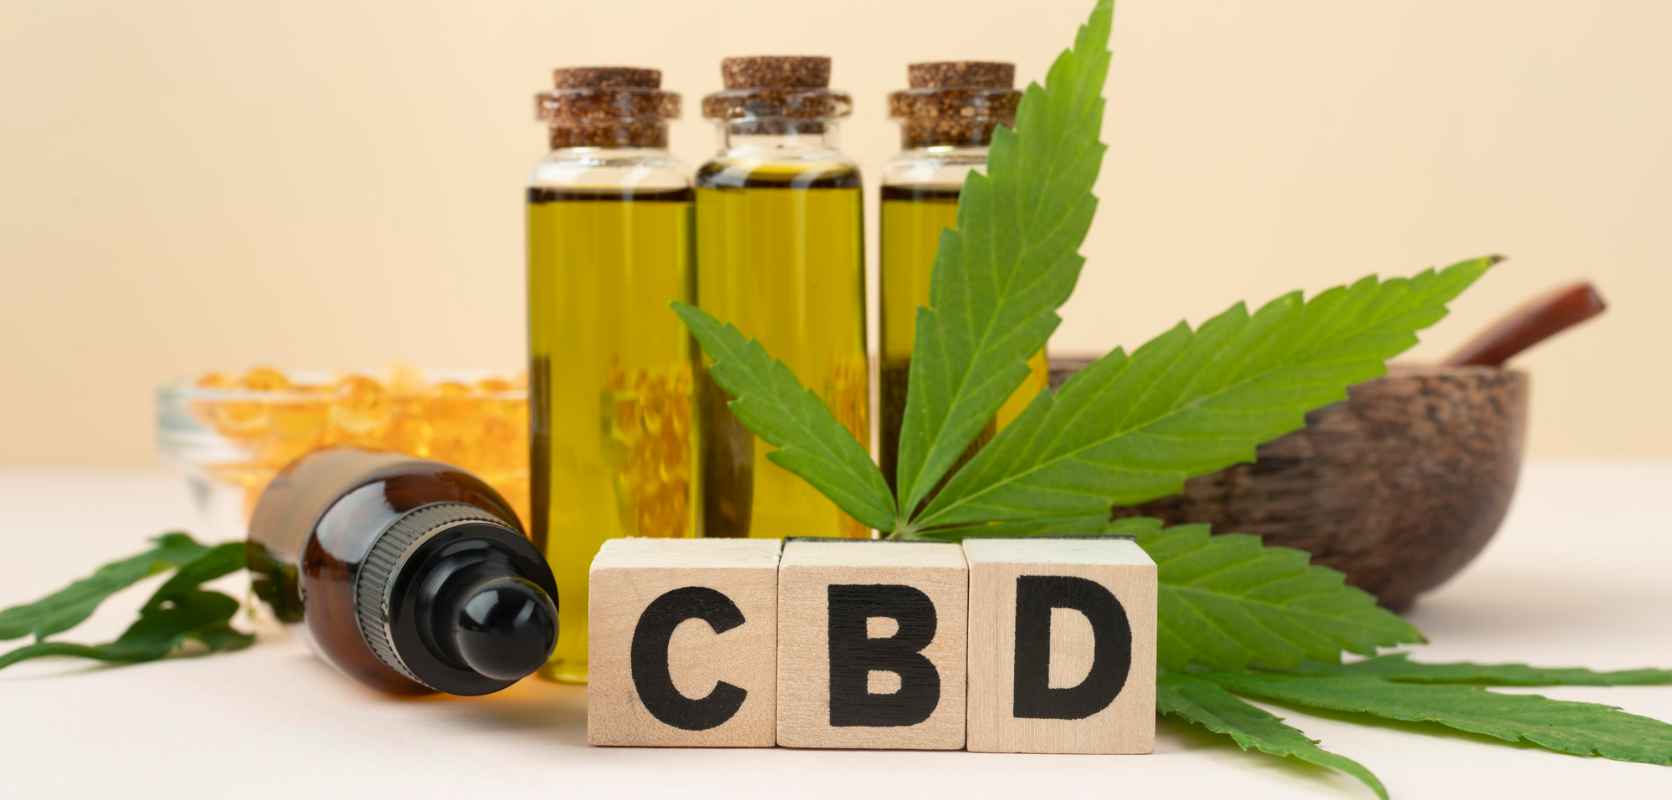 CBD oil is mainly composed of cannabidiol, which has been used to treat various conditions, including seizures and mental disorders.